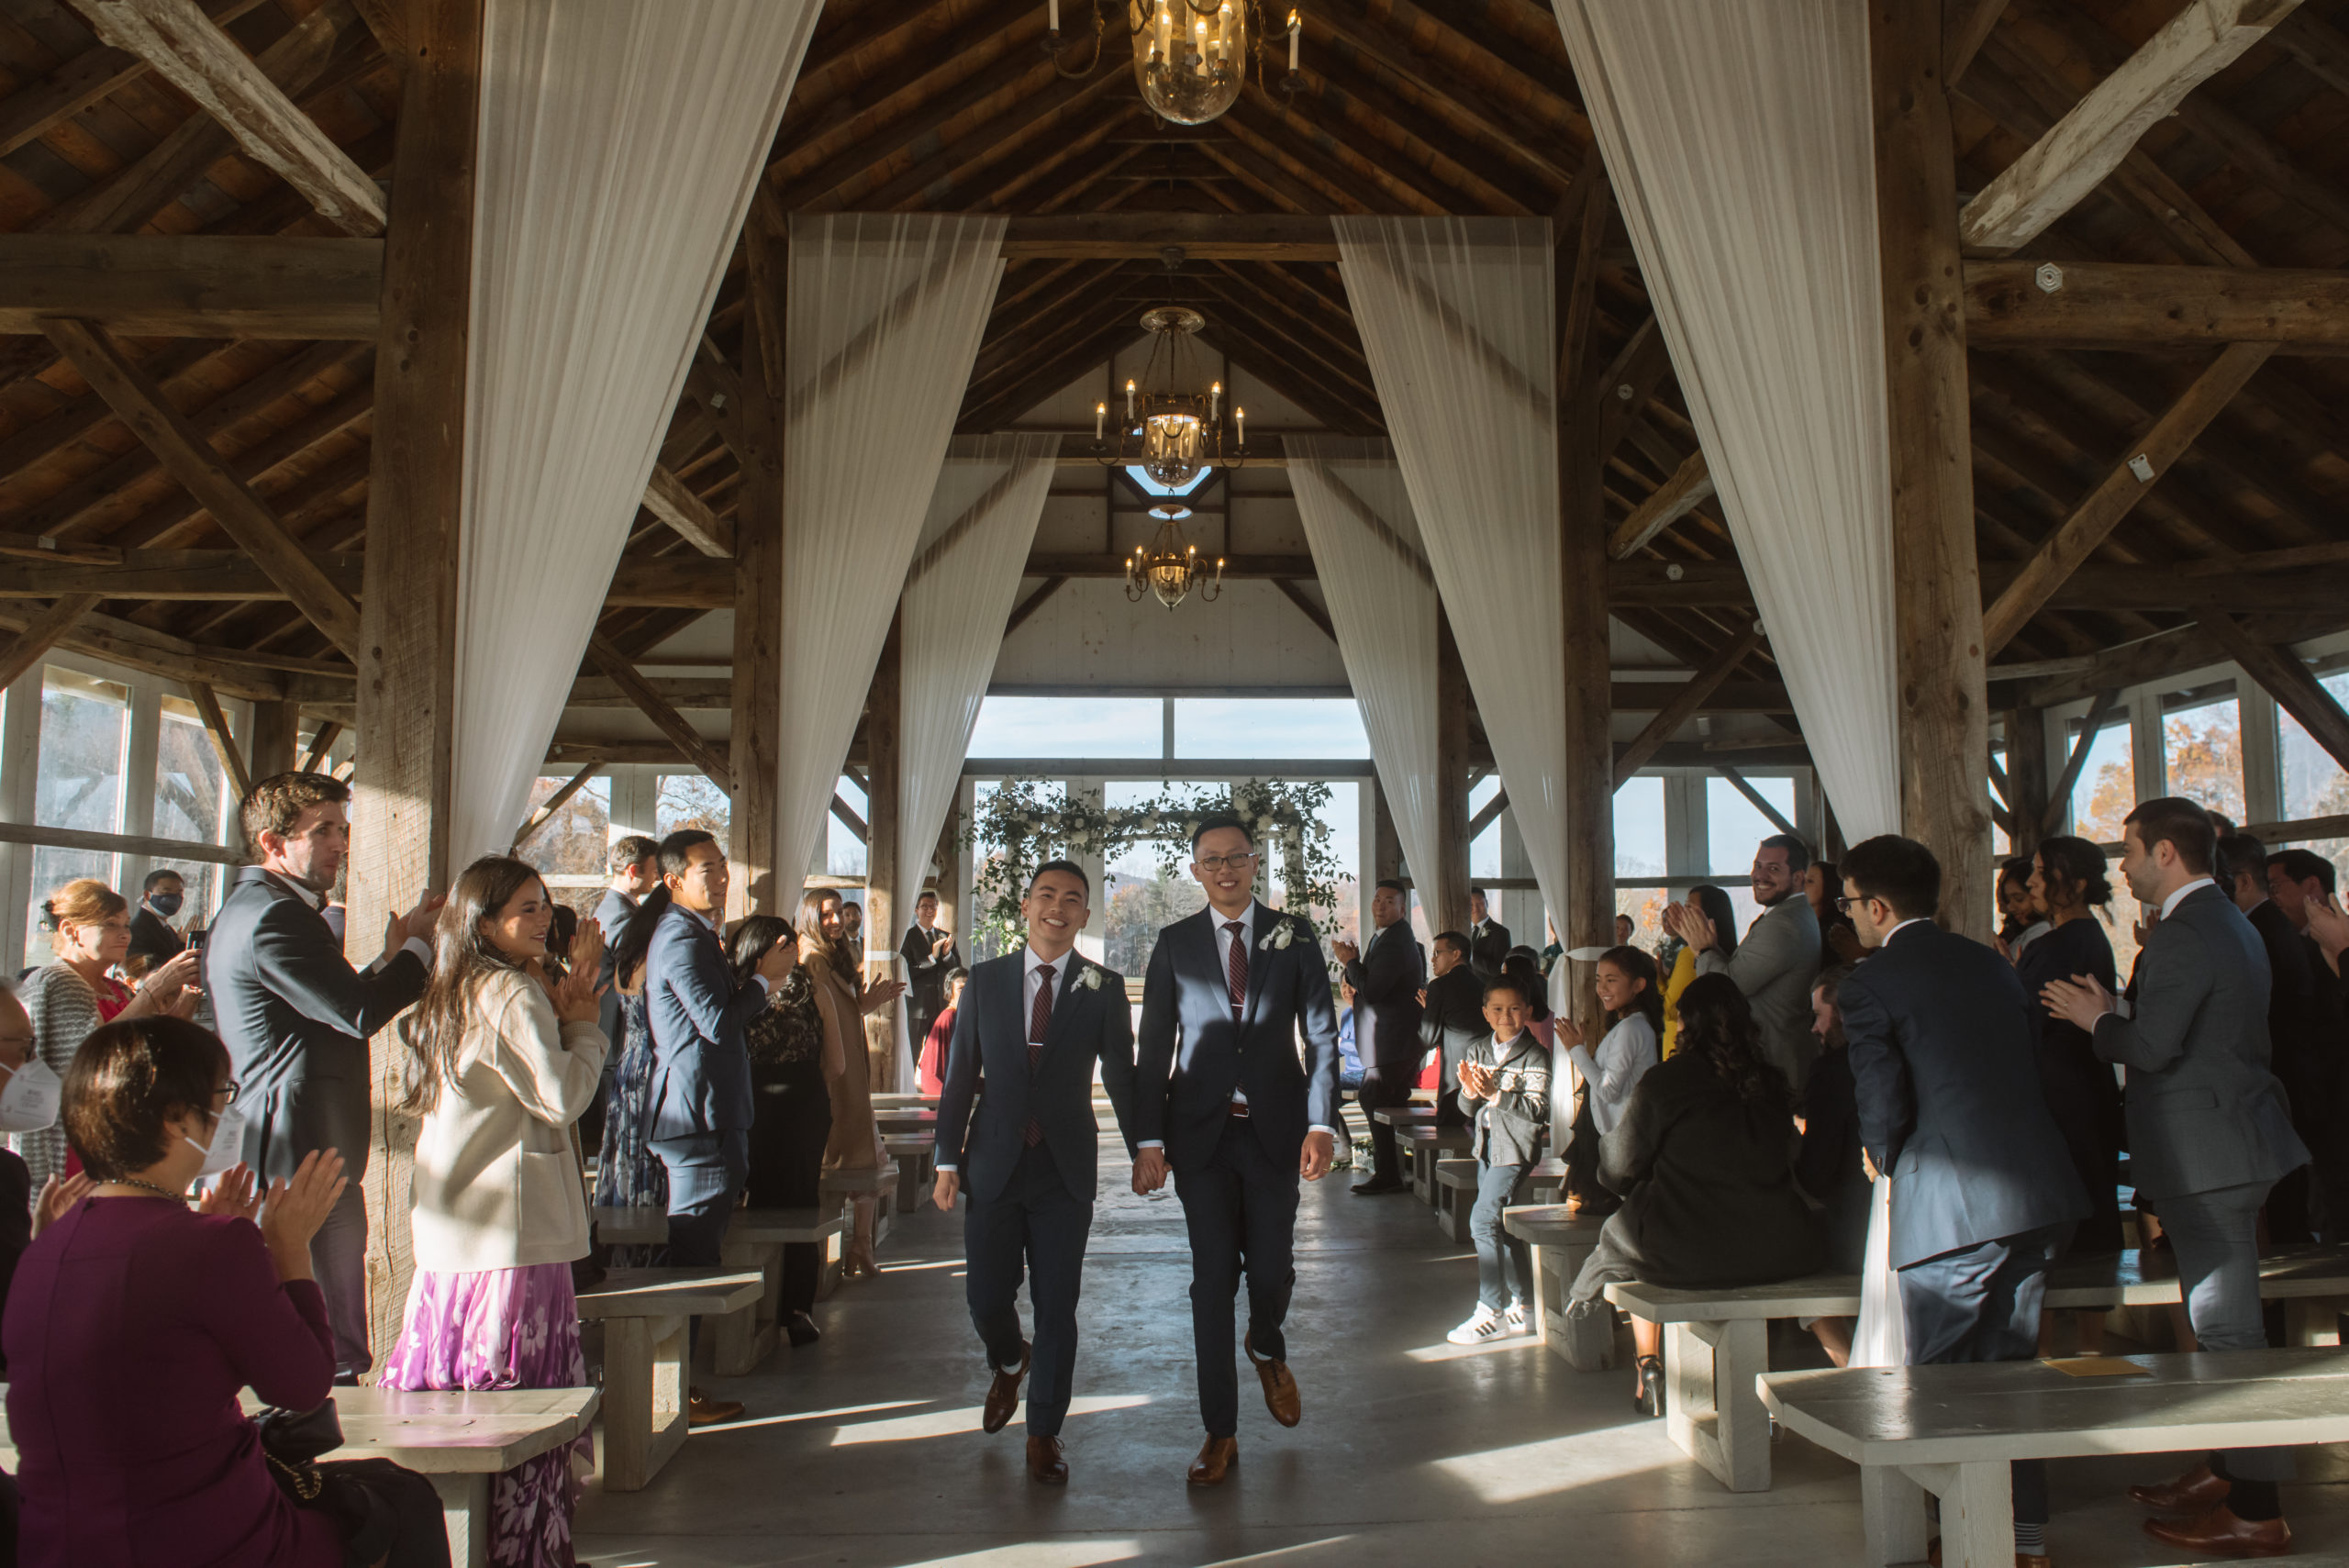 Two grooms walking hand in hand with big smiles right after their ceremony. All of their guests are smiling and clapping for the happy couple. The ceremony location is a barn-style indoor area with big wooden beams and wooden benches for the guests. The beams are decorated with white sheer curtains.